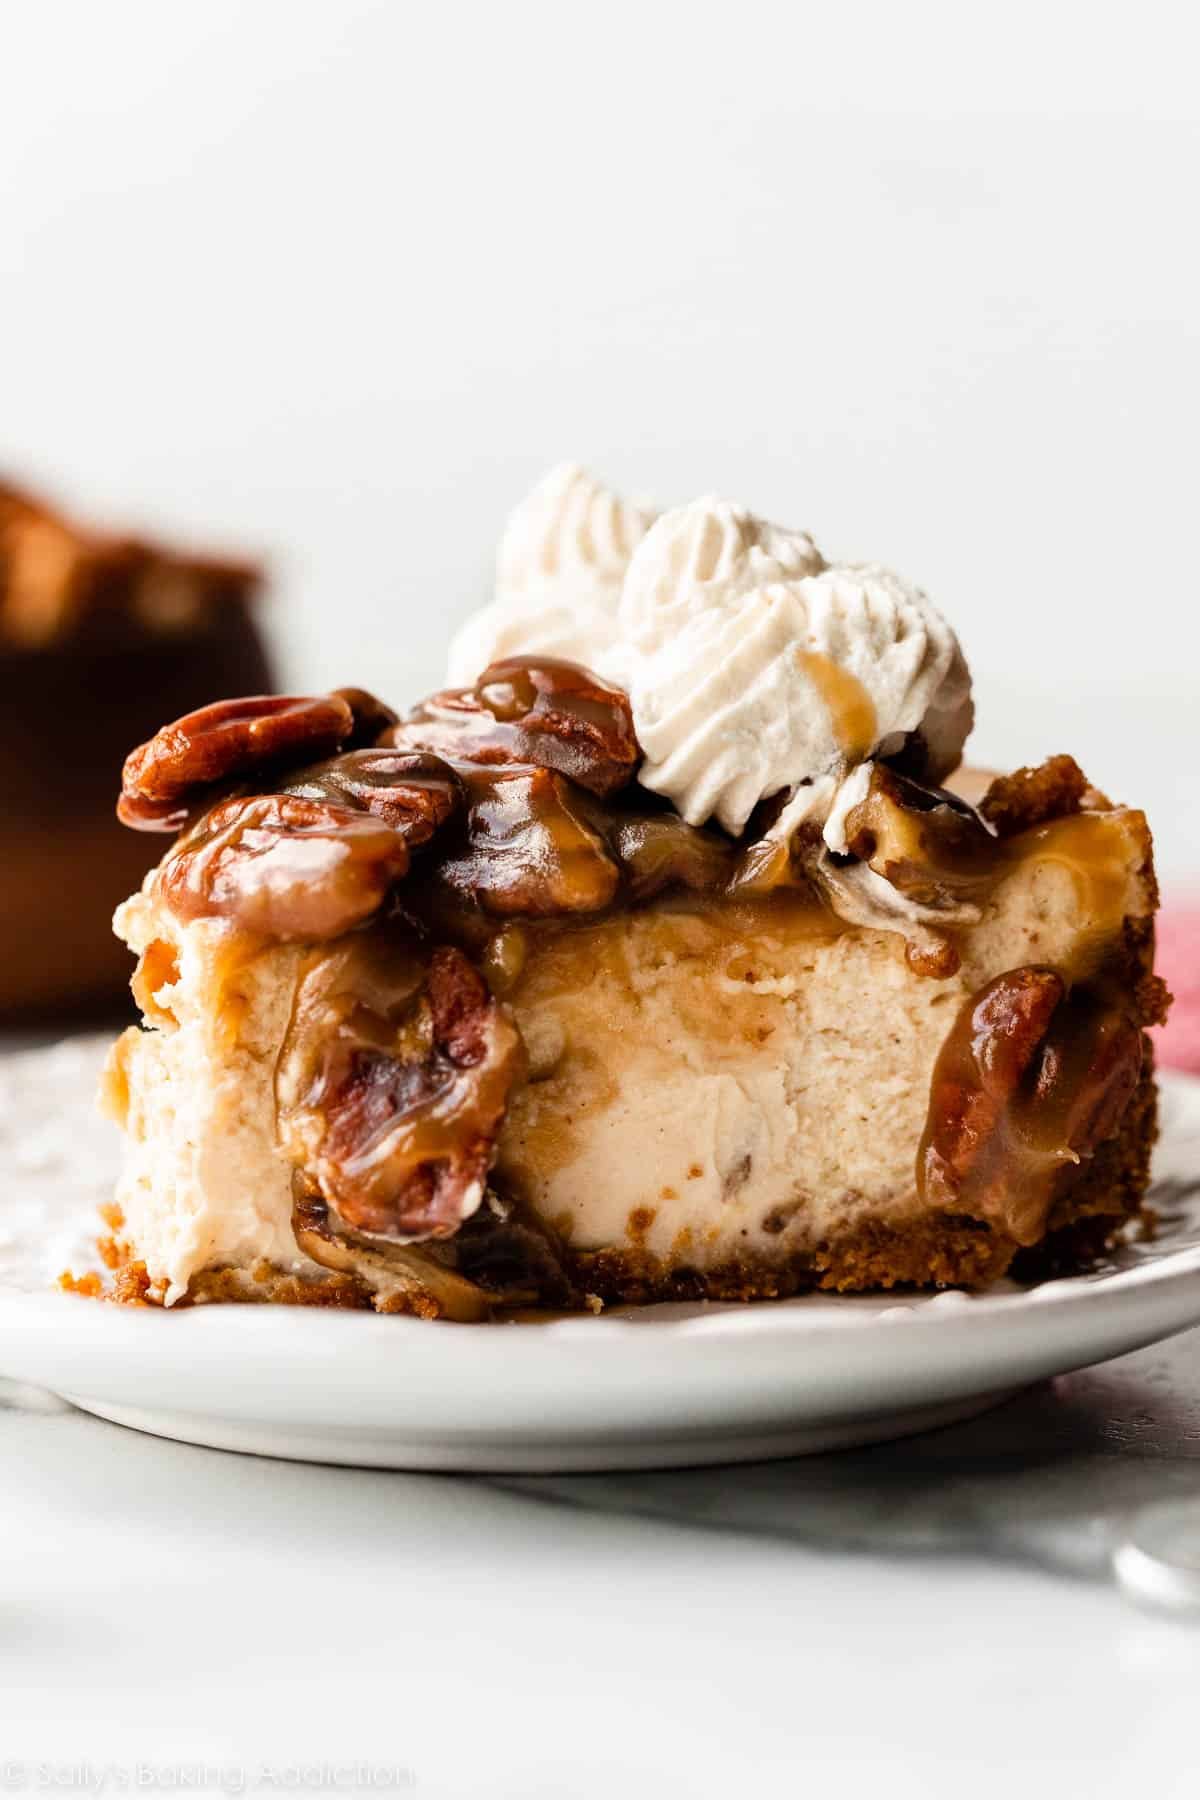 slice of brown sugar pecan pie cheesecake with gooey caramel topping and whipped cream piped on top.